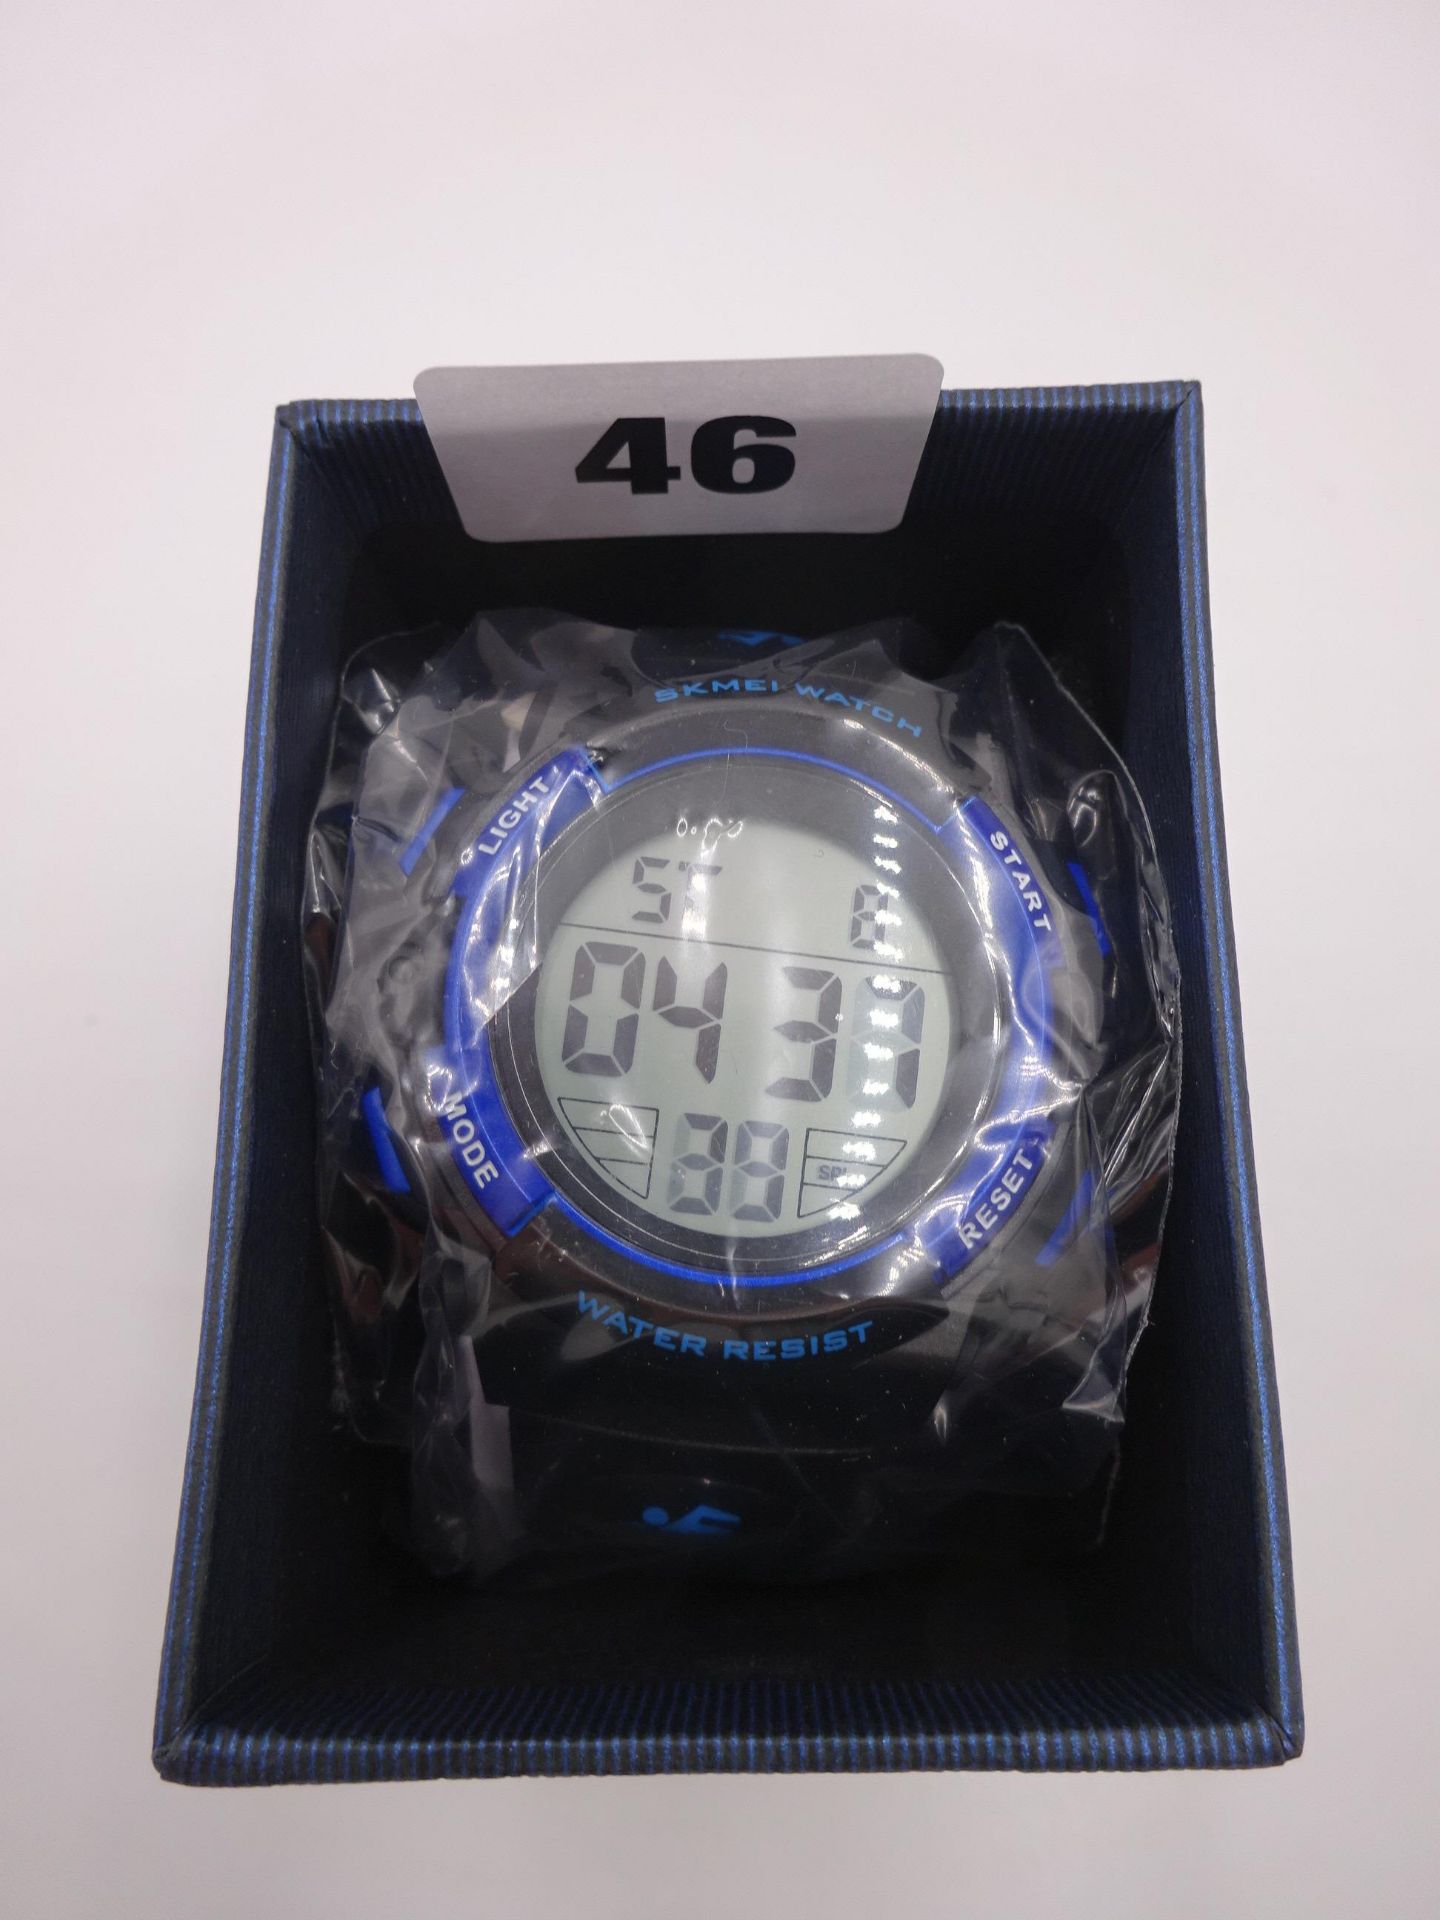 New sport watch water resist black strap with hints of blue digital.